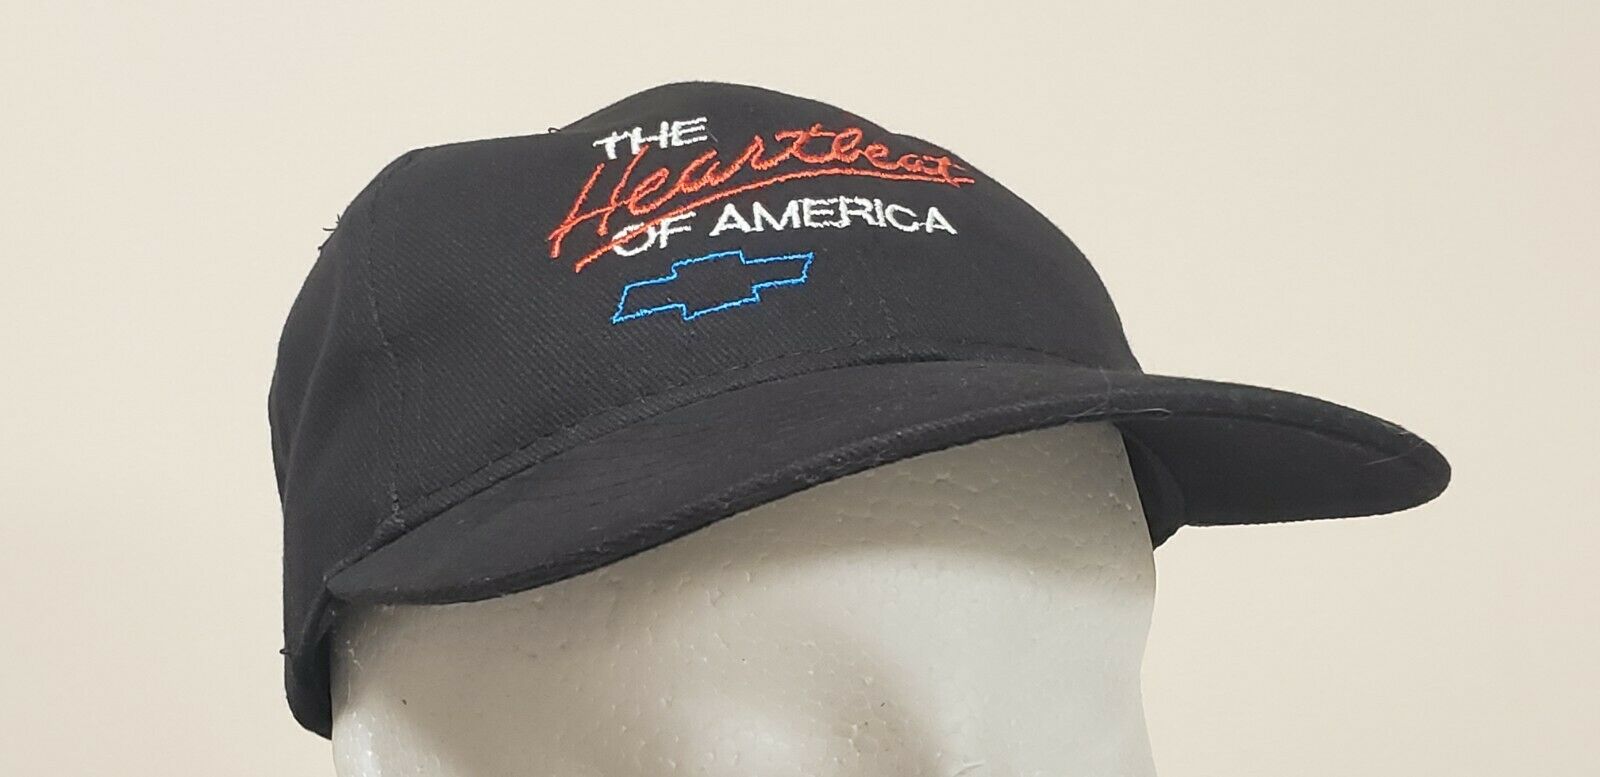 Chevrolet "the Heartbeat Of America" Vintage Style Embroidered Cap - Ver 2